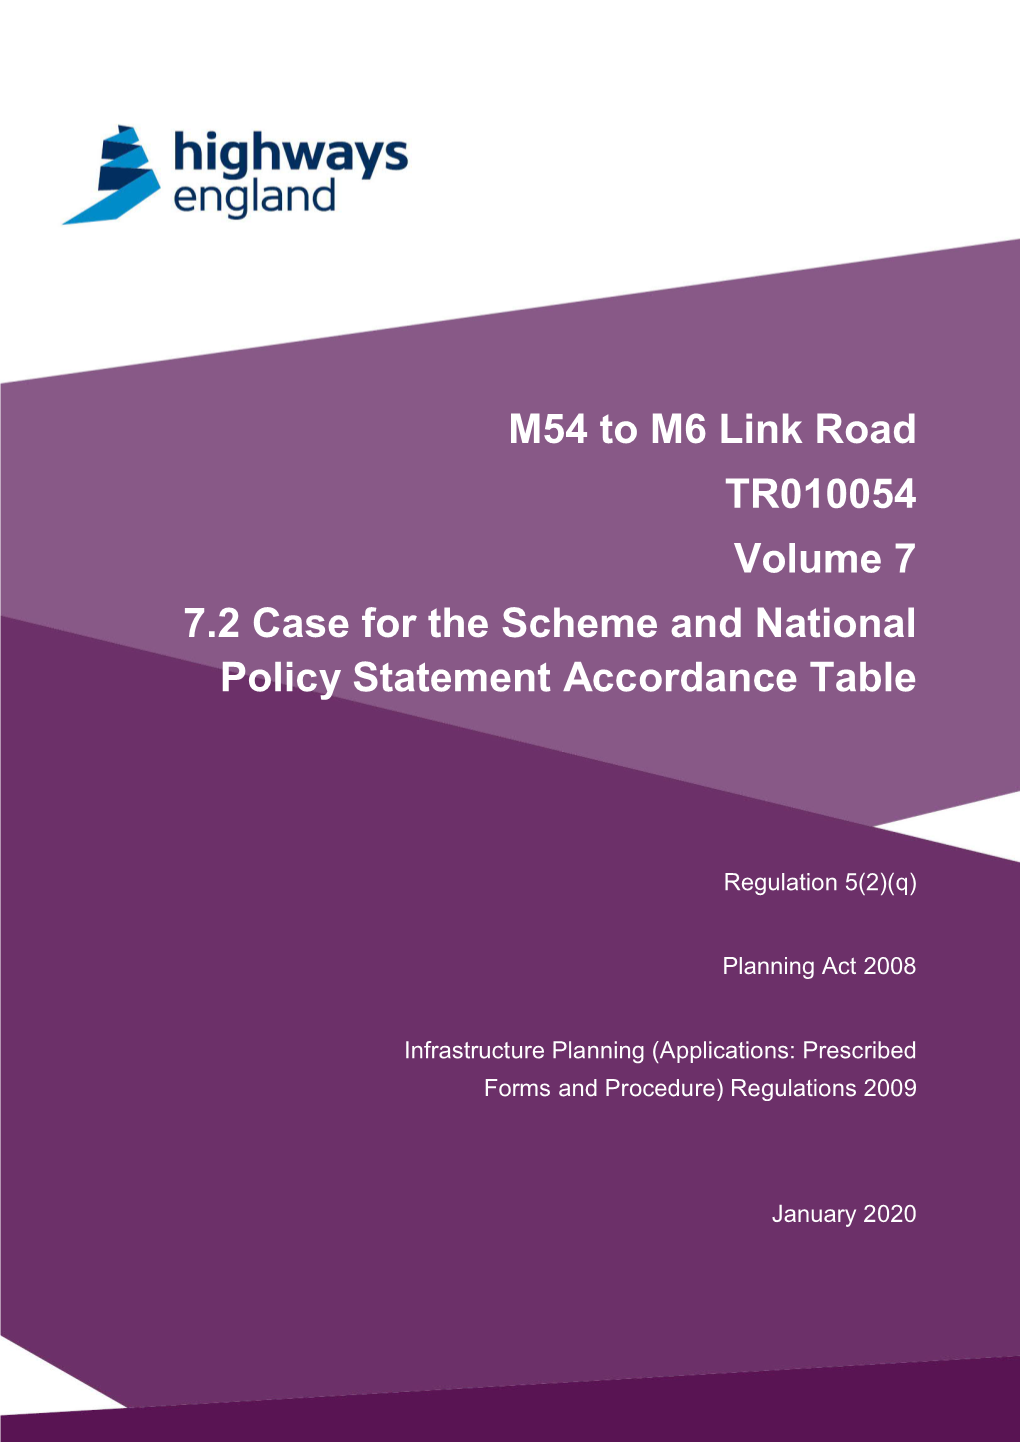 M54 to M6 Link Road TR010054 Volume 7 7.2 Case for the Scheme and National Policy Statement Accordance Table